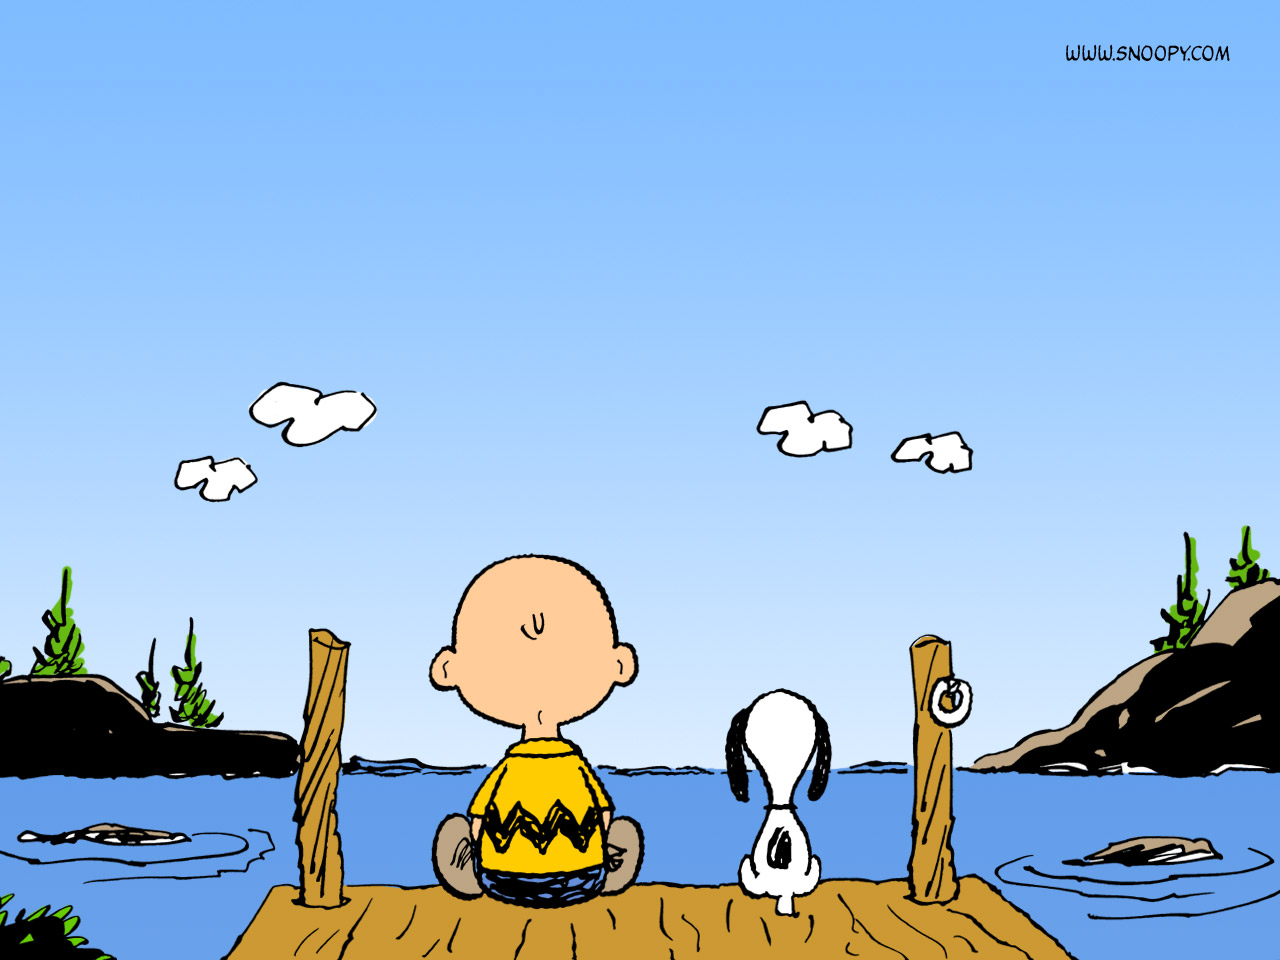 Snoopy - Snoopy Wallpapers